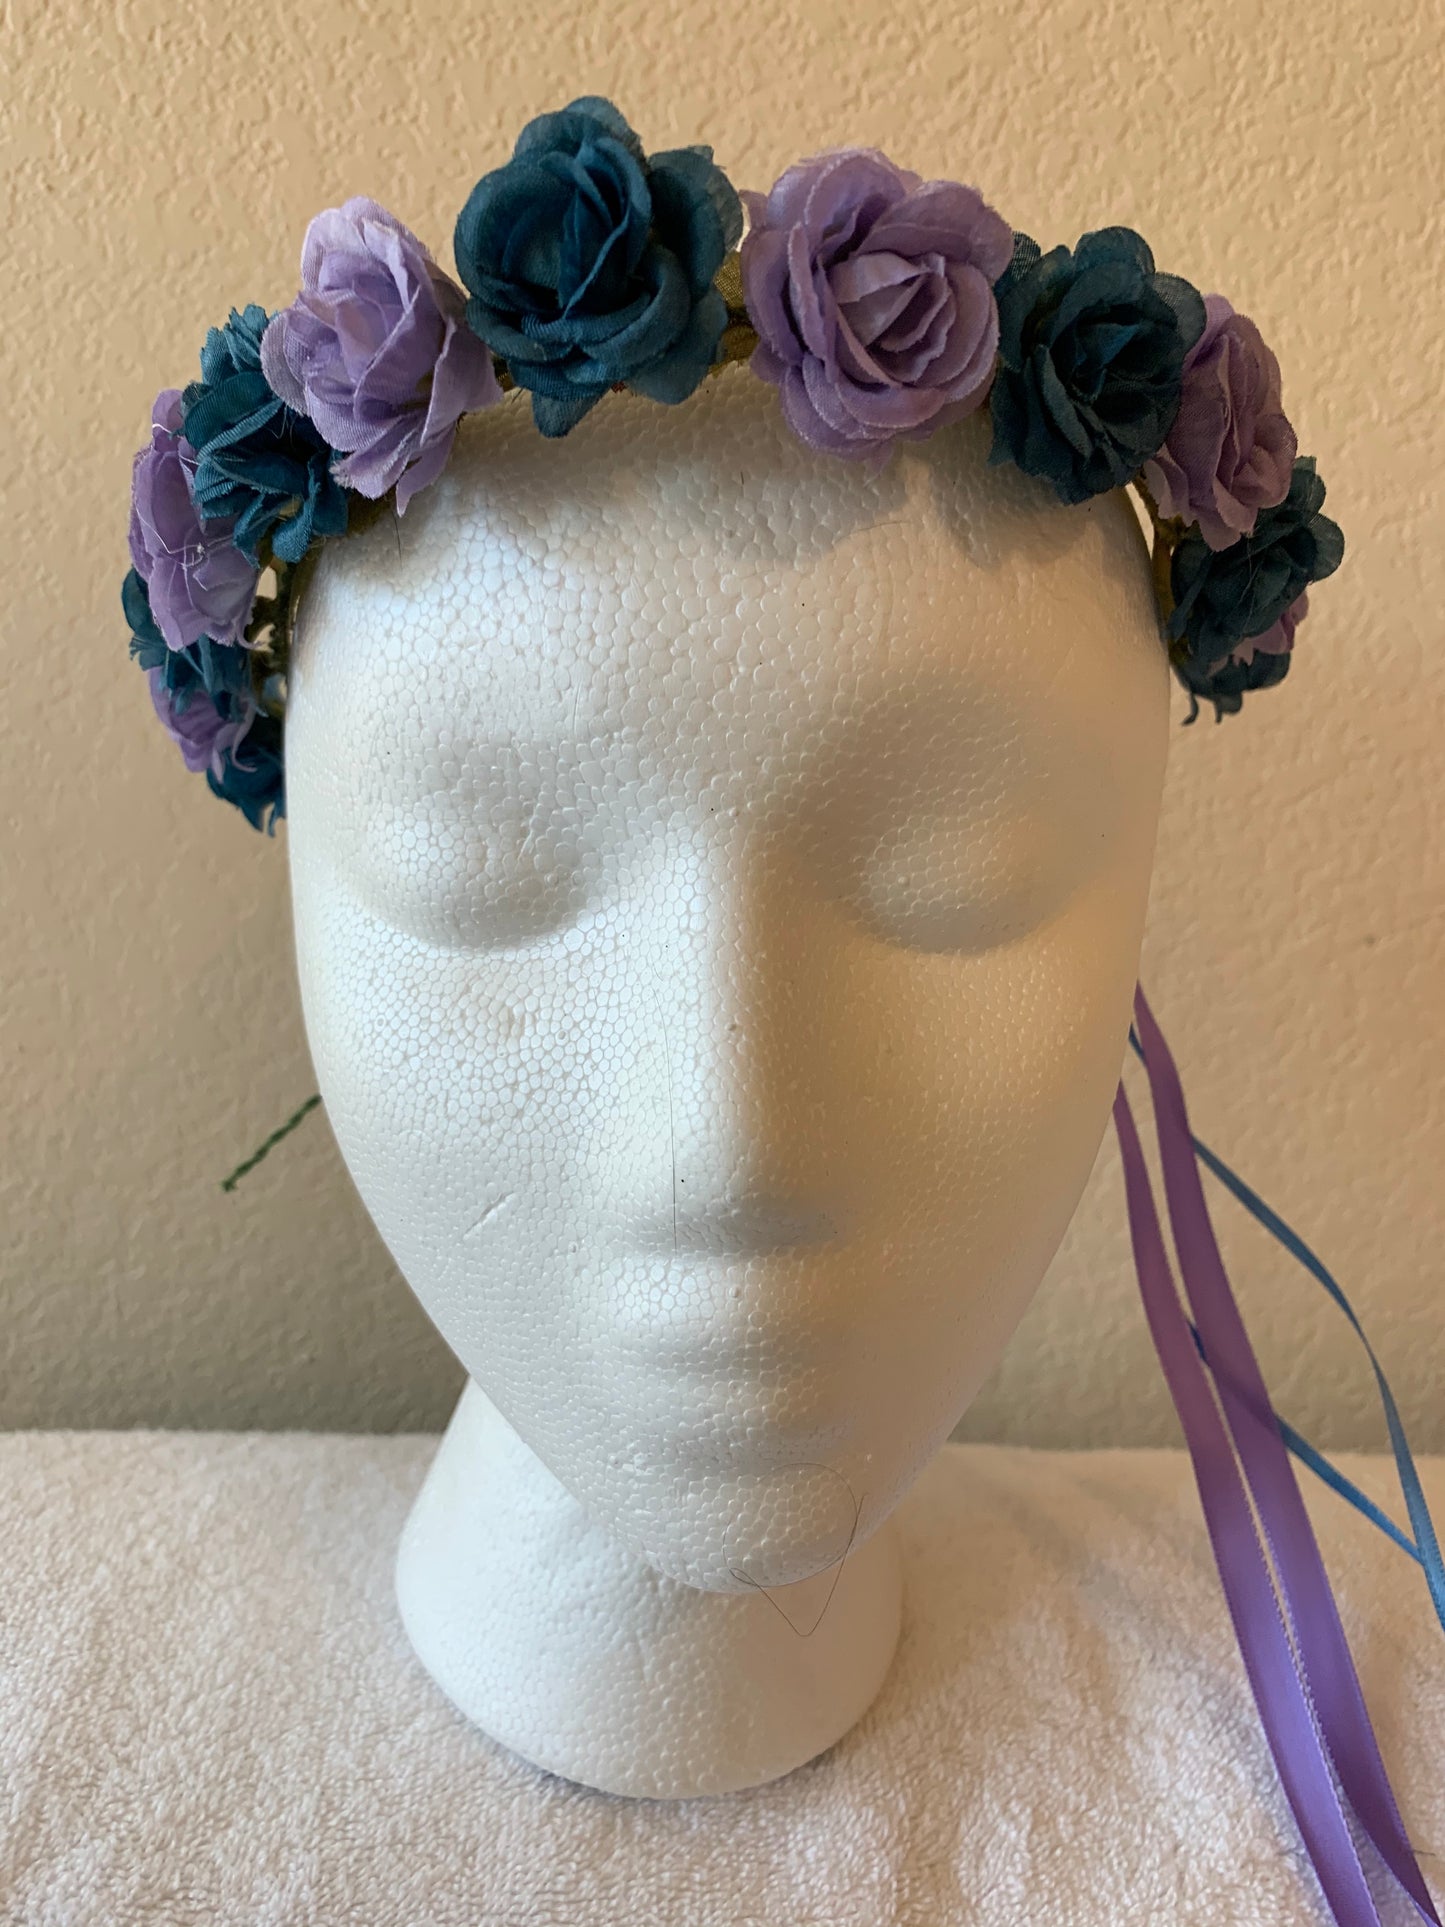 Extra Small Wreath - Purple and Dusty Blue Roses